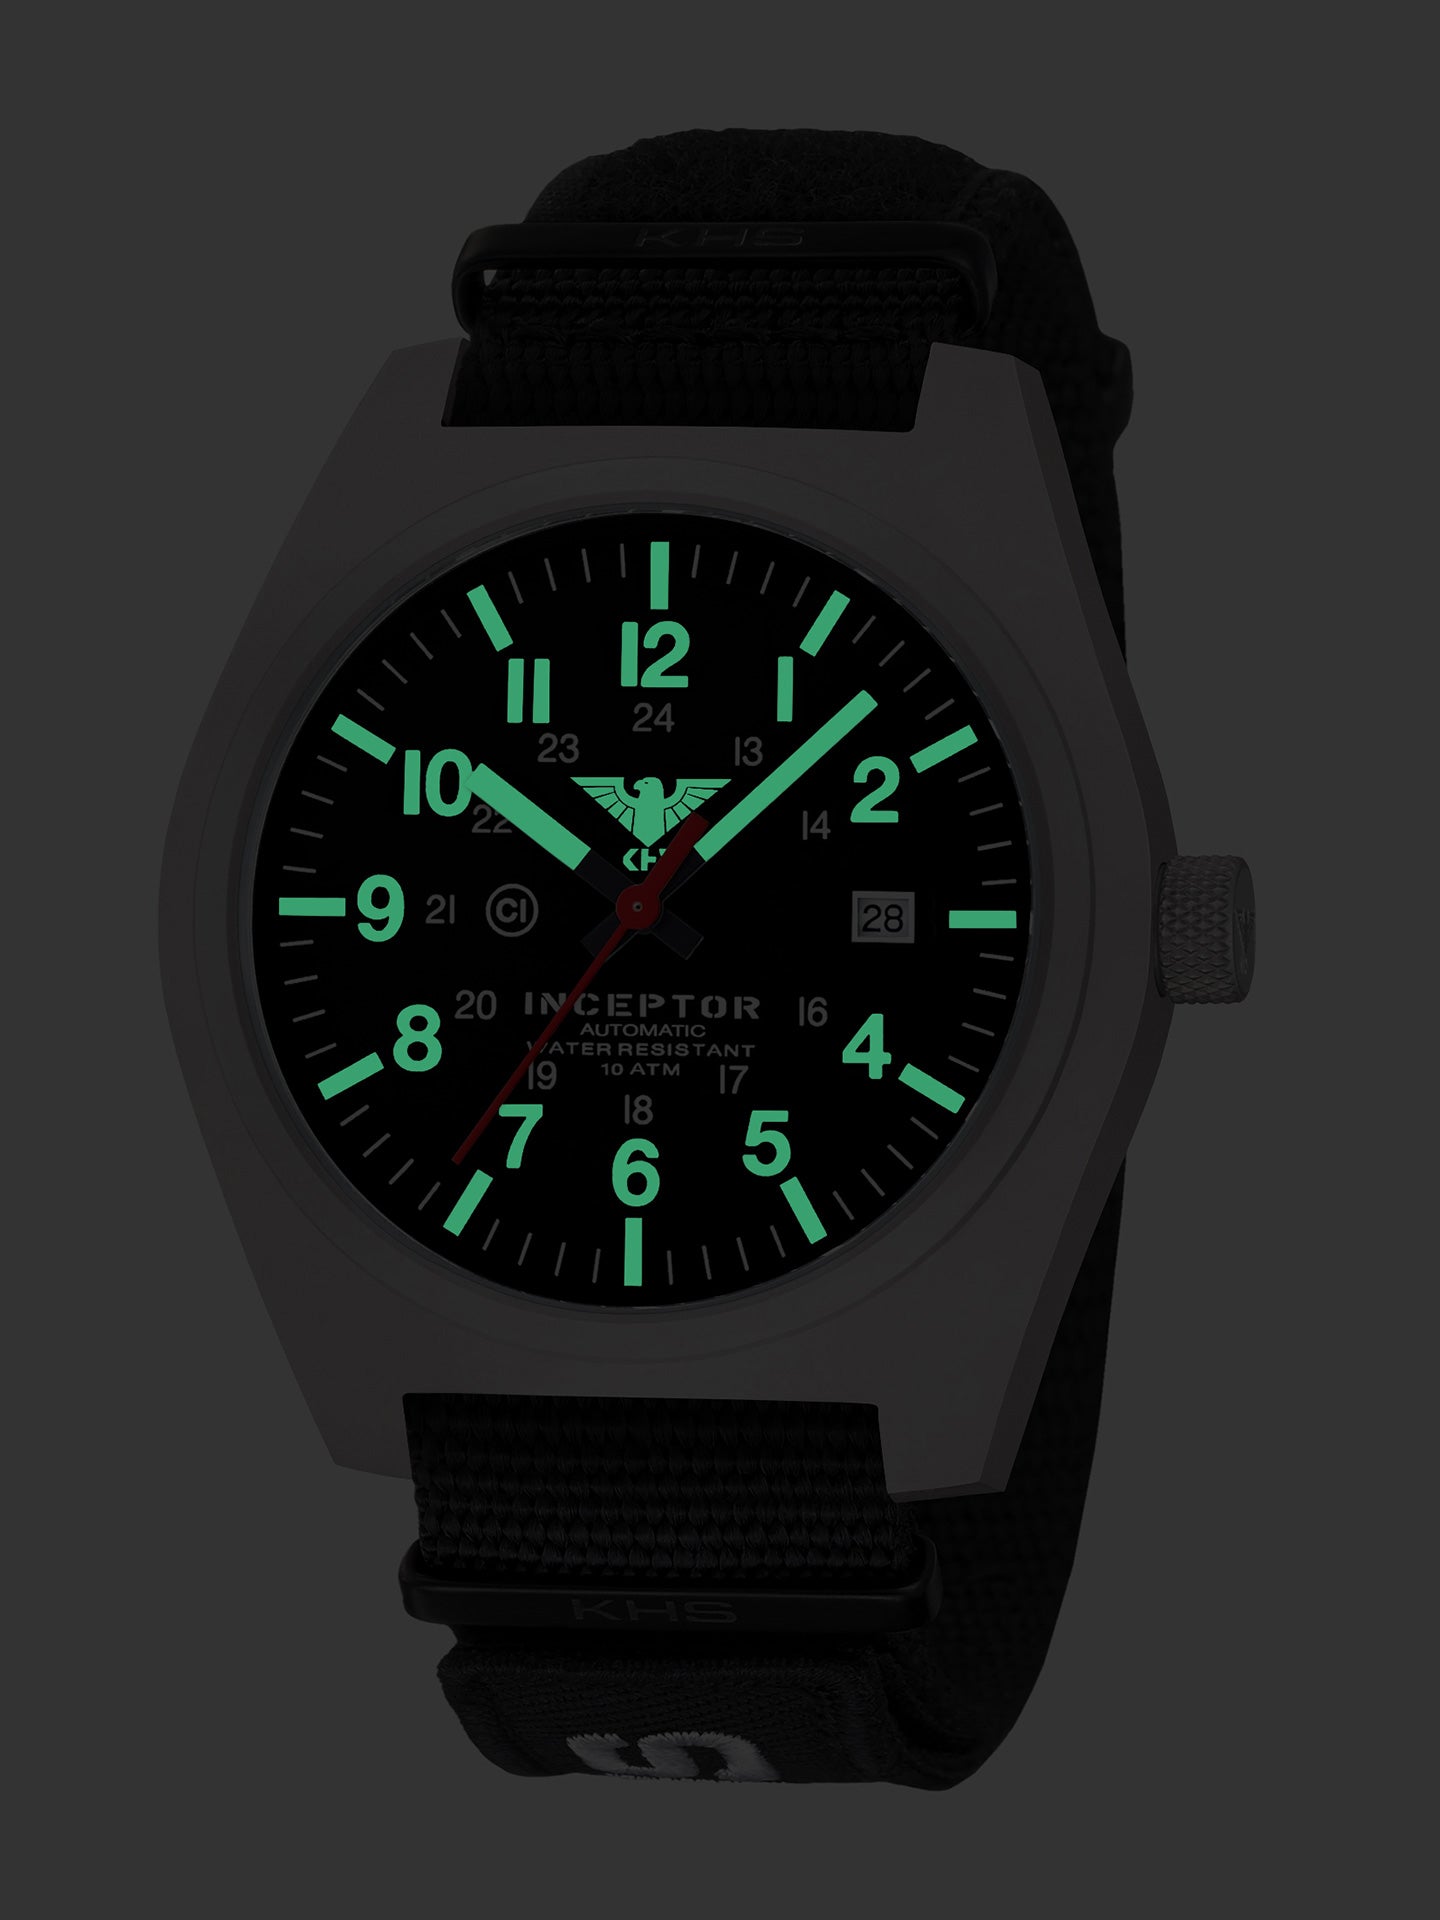 INCEPTOR Steel Automatic